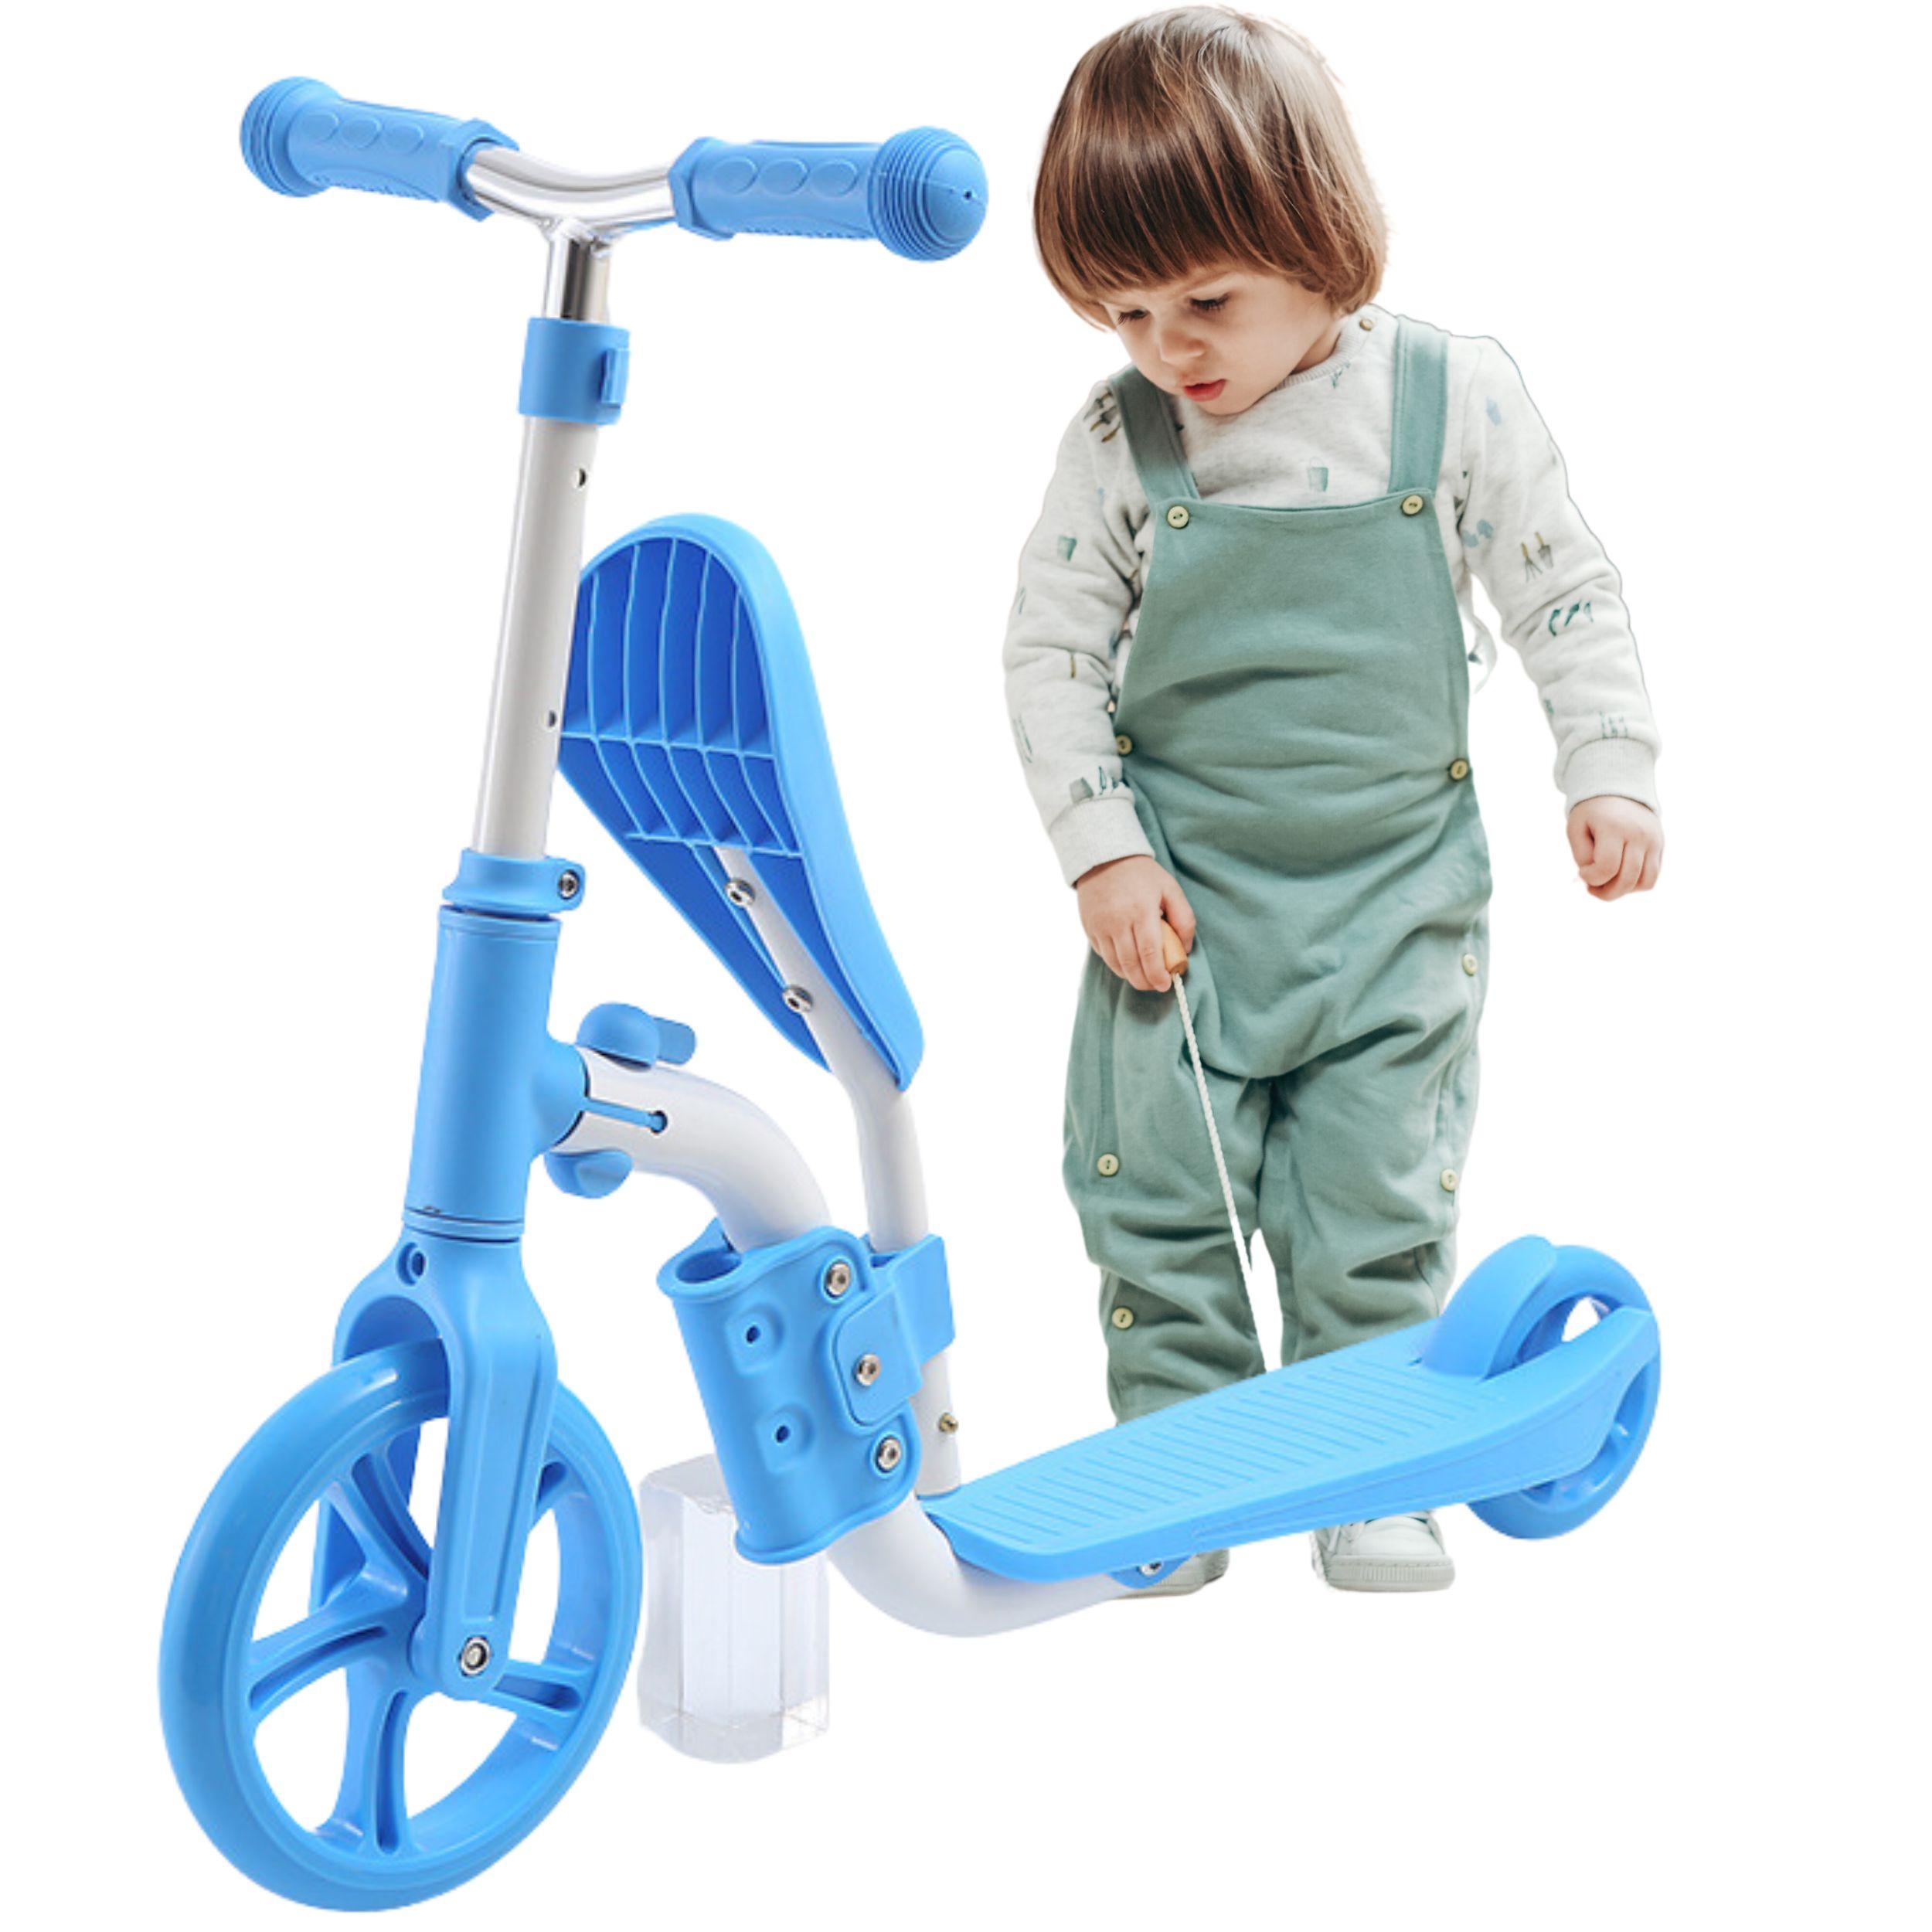 Baby scooter with seat - blue